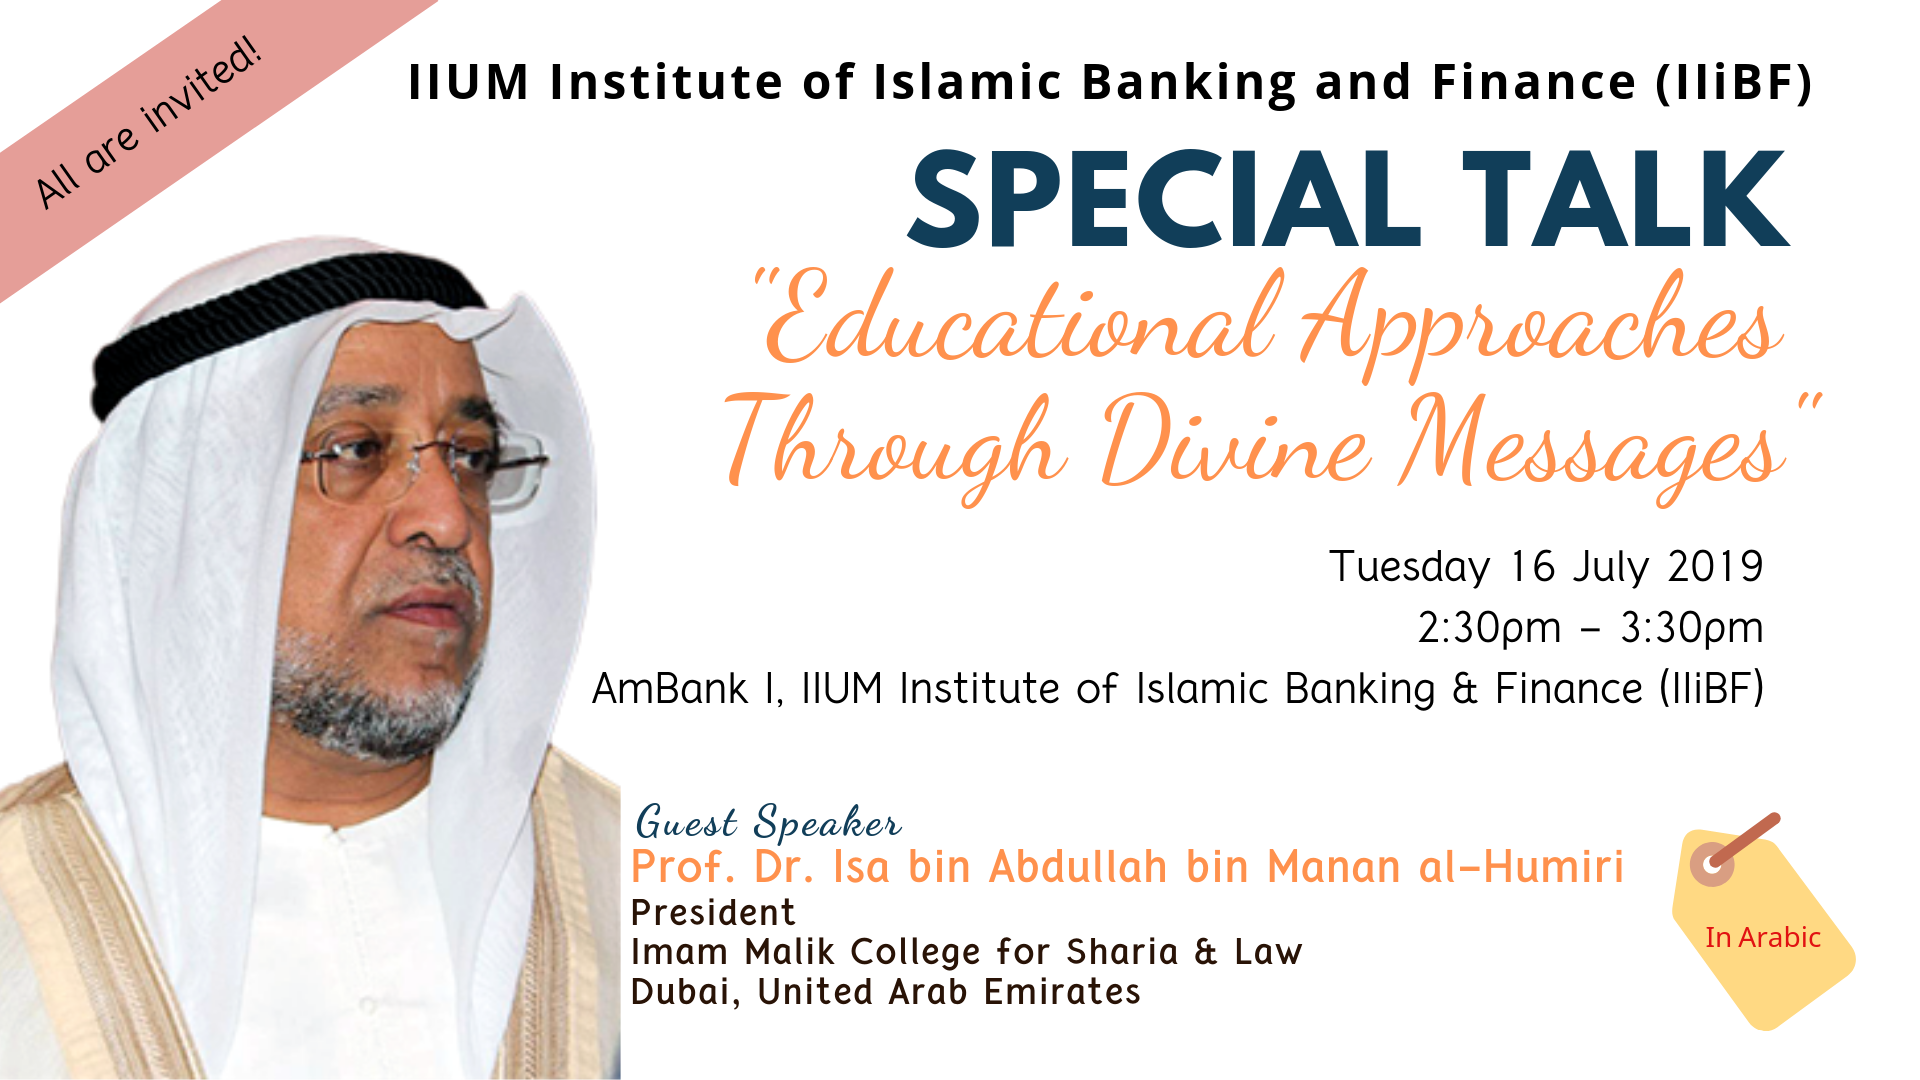 Special Talk - Professor Dr. Sheikh Issa President, Imam Malik College for Shari’a and Law